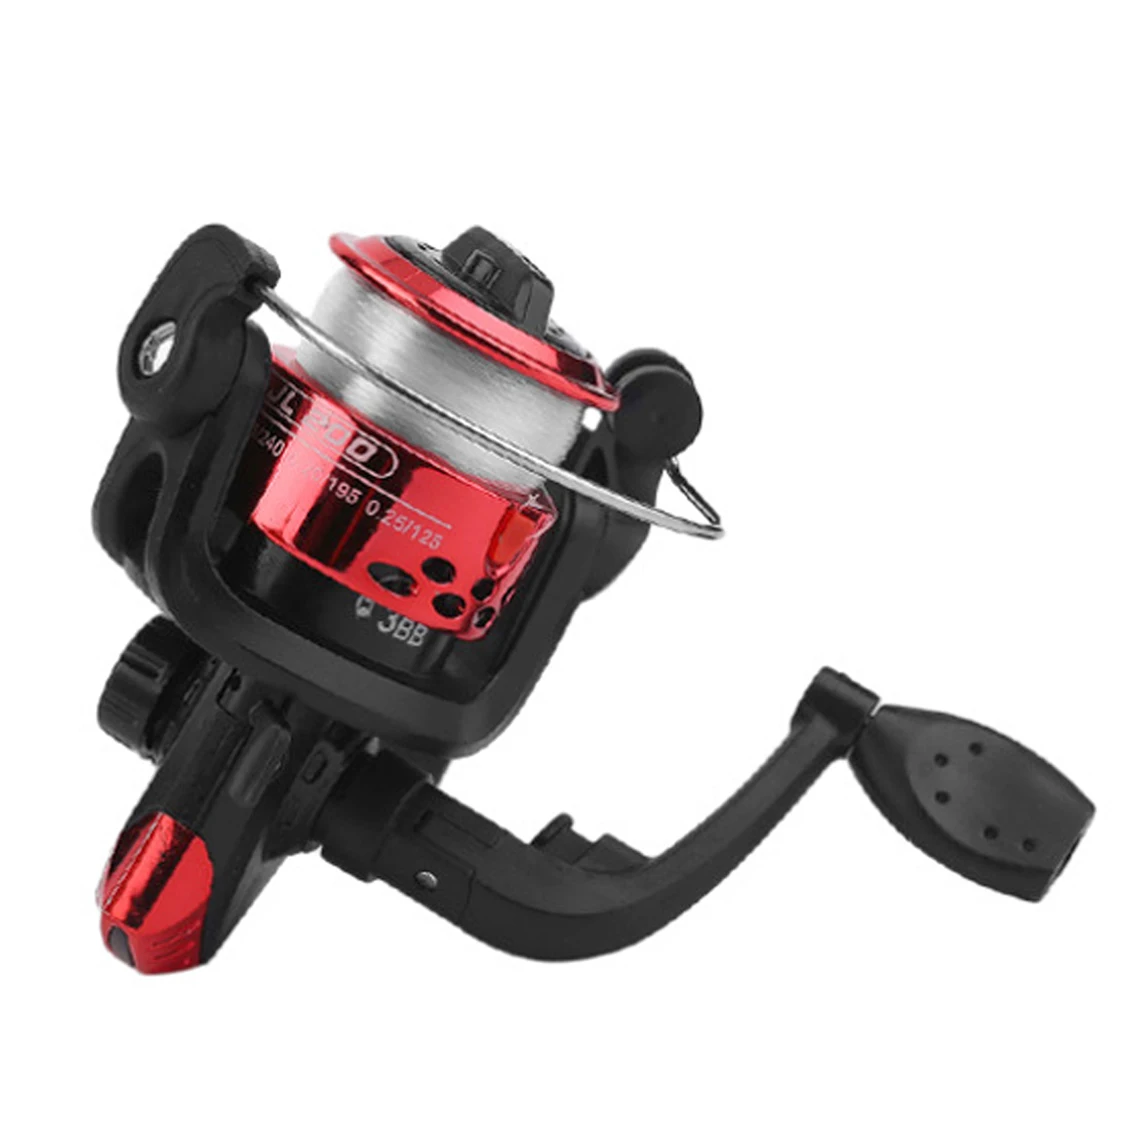 

LURETIMES High Quality 3BB 5.1:1 Spinning Fishing Reels For Fresh Salt Water Fly Fishing Reel, Blue,gold,red,siliver